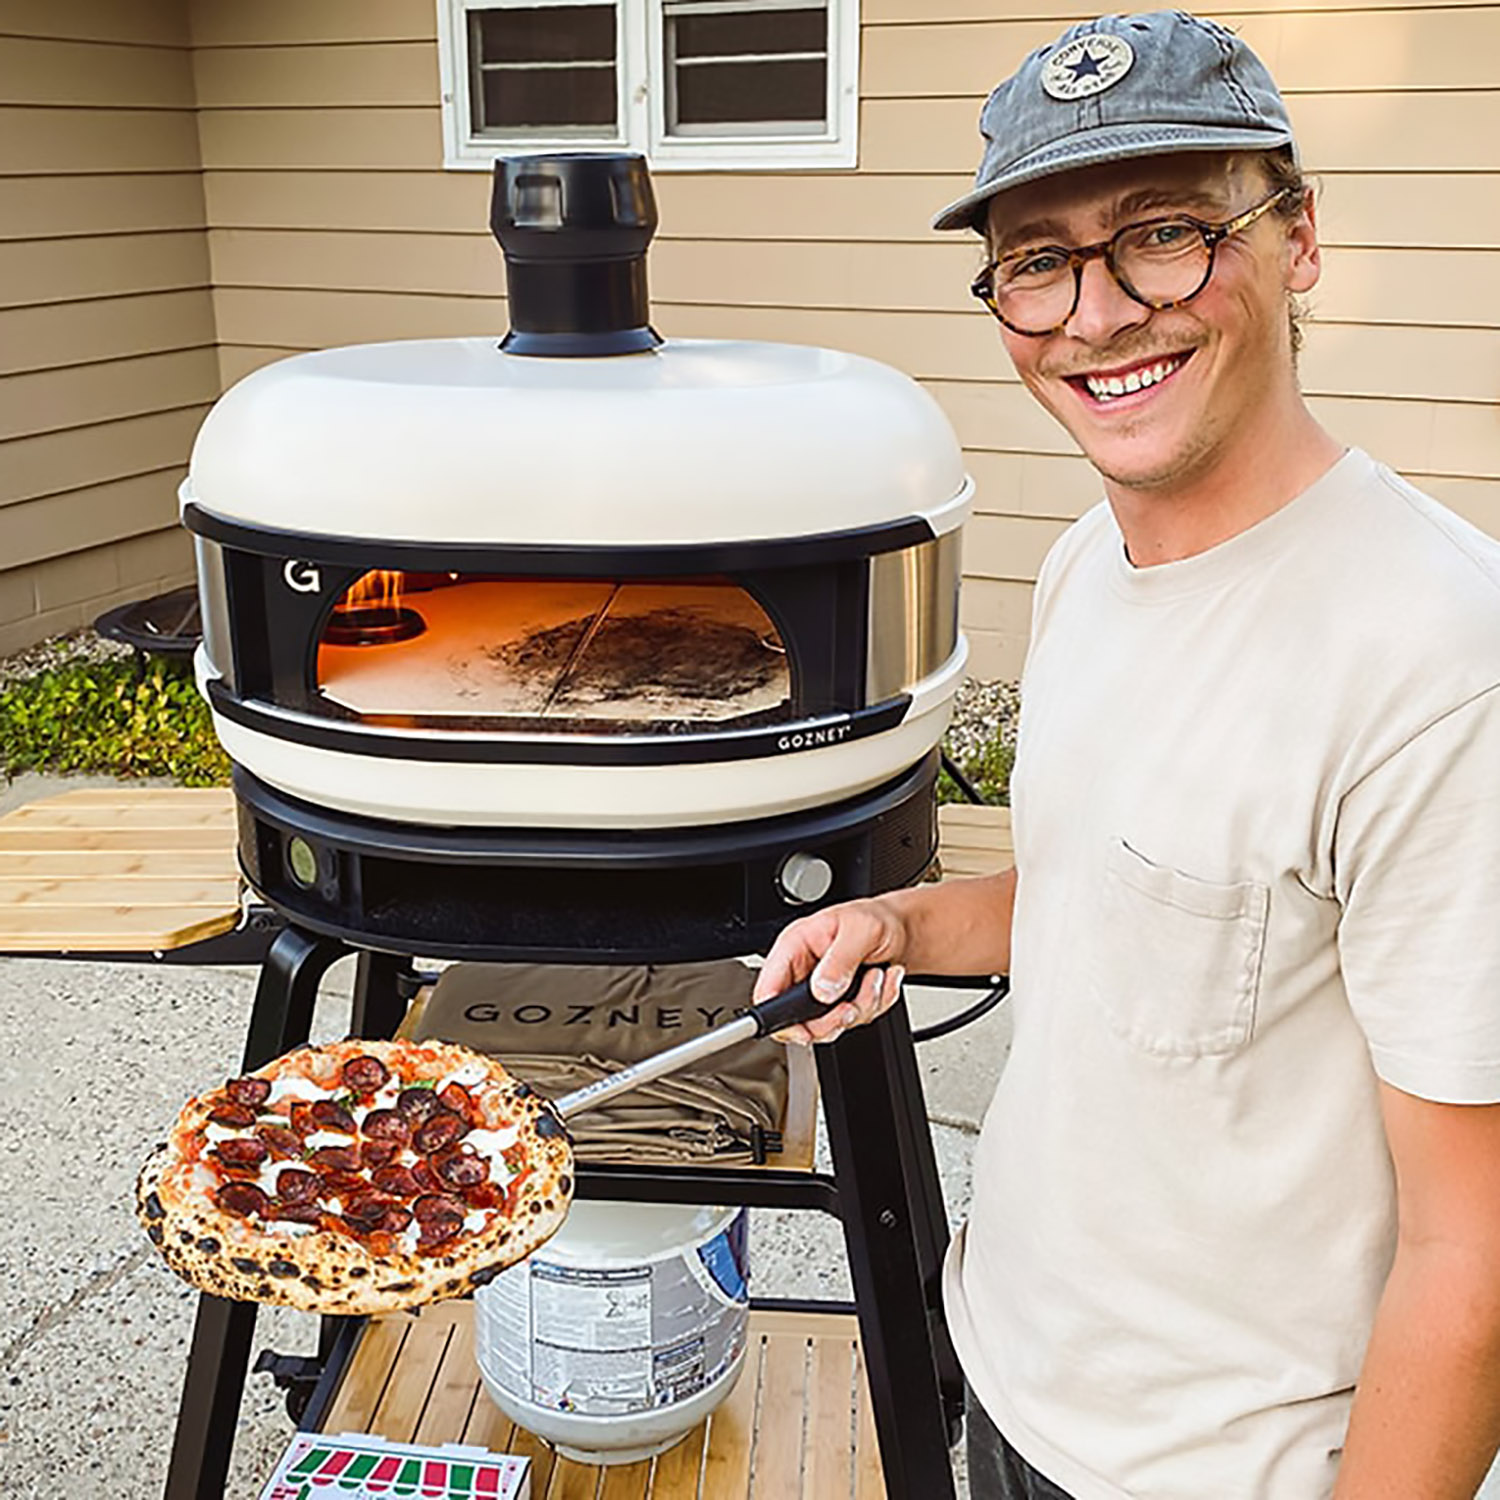 GOZNEY PIZZA OVEN FOR BACKYARD WITH PEPPERONI PIZZA WOOD FIRED